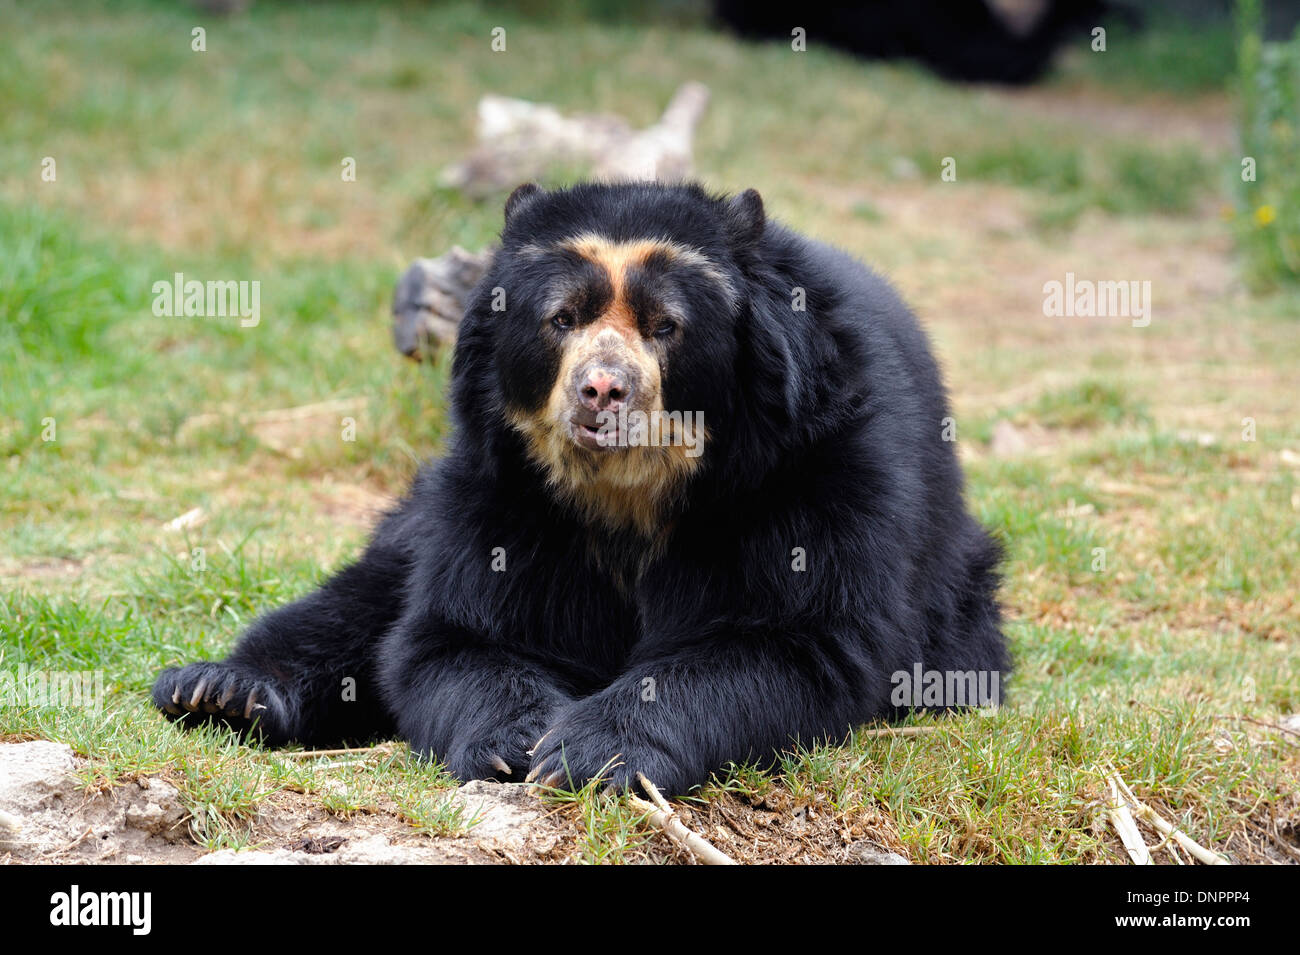 Andean spectacled bear (Tremarctos ornatus) in the Quito zoo, Ecuador Stock Photo